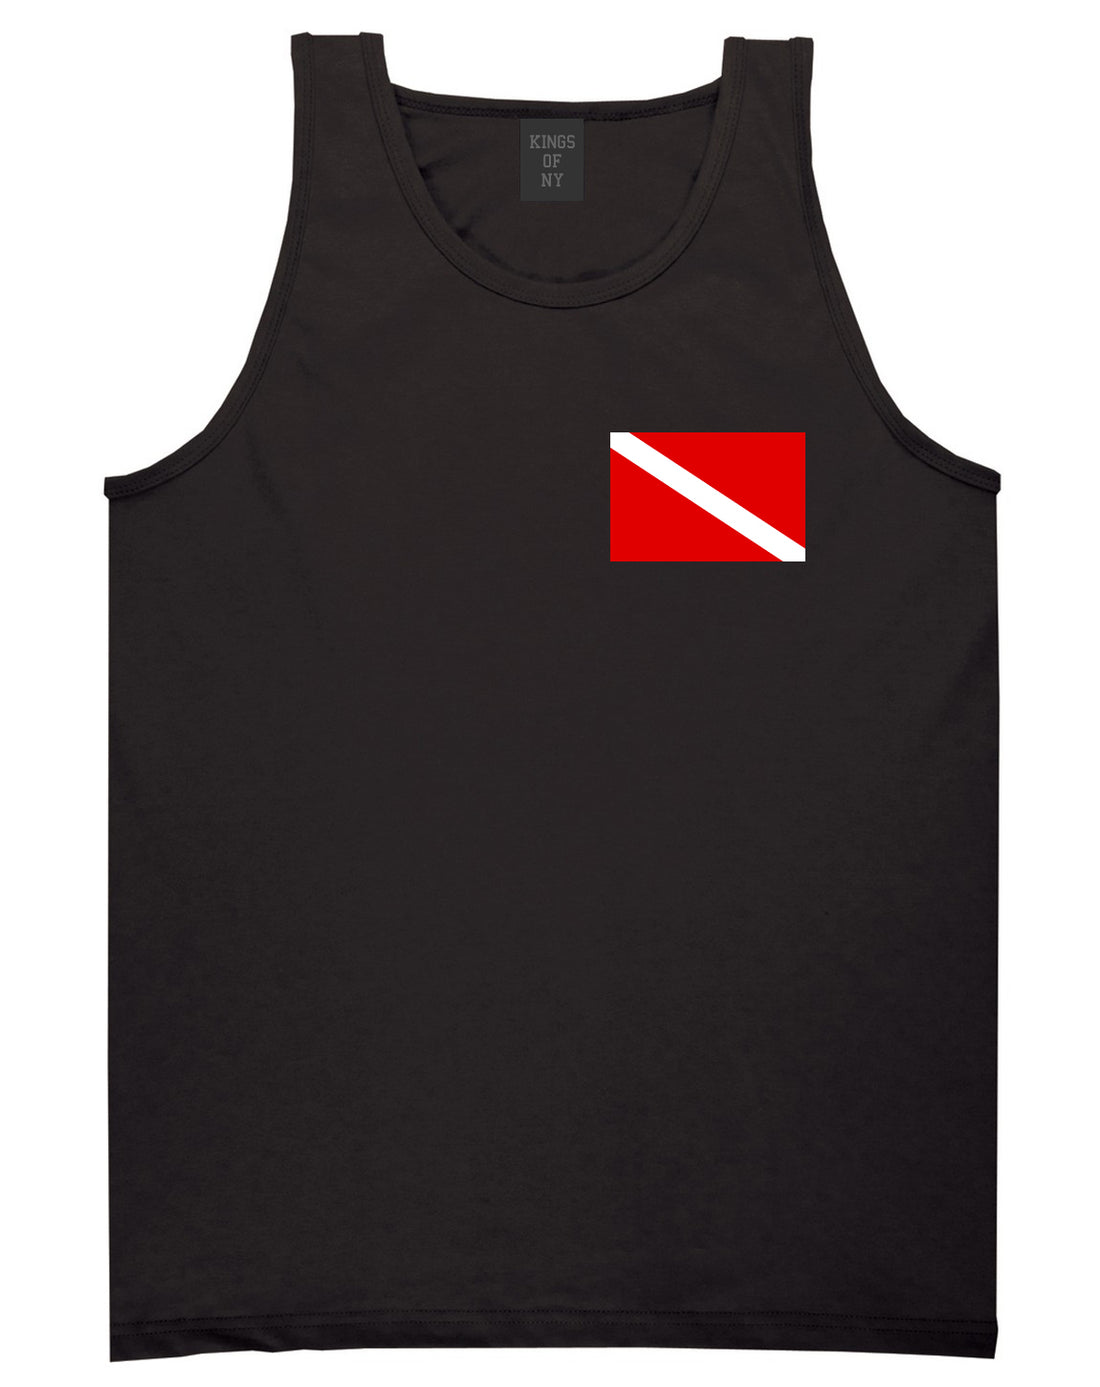 Scuba_Dive_Flag_Chest Mens Black Tank Top Shirt by Kings Of NY